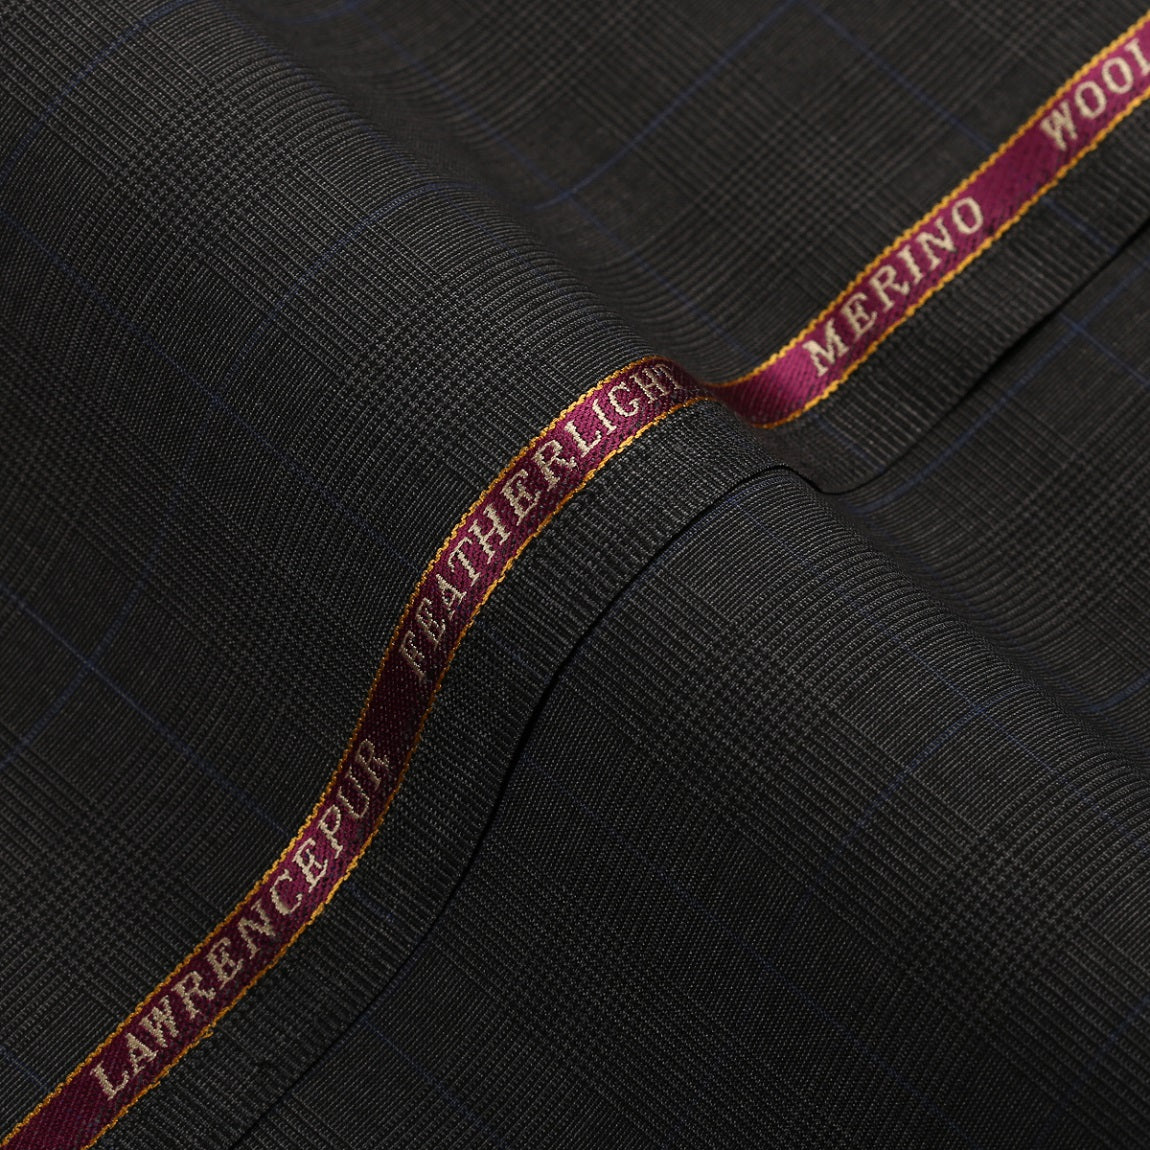 Glen Plaid Checks-Charcoal Grey, Wool Blend, Featherlight Suiting Fabric